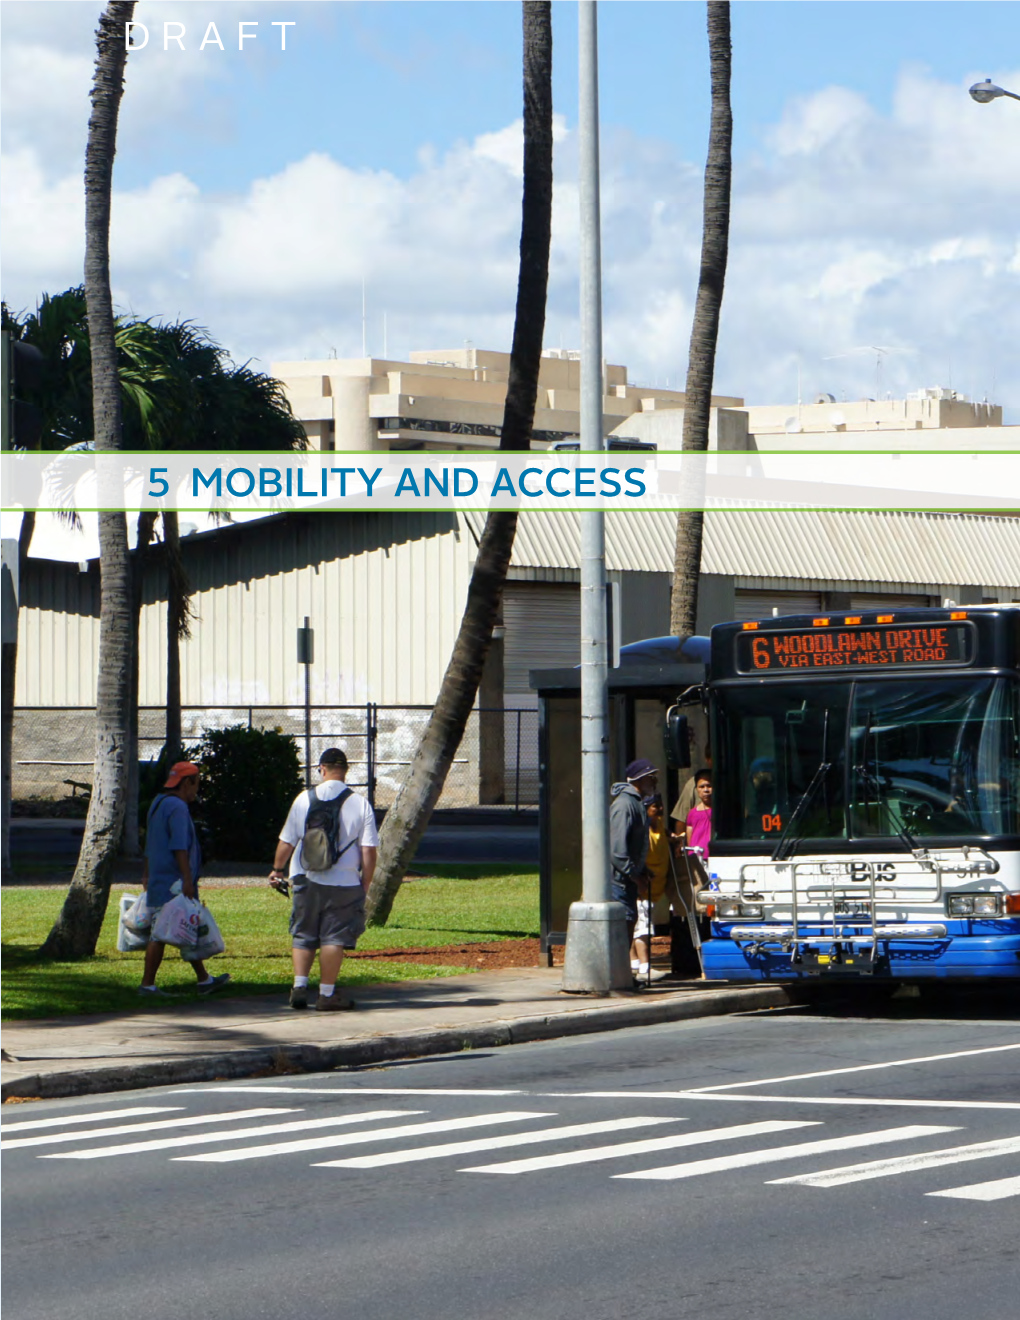 Kakaako TOD Overlay Draft 5 Mobility and Access